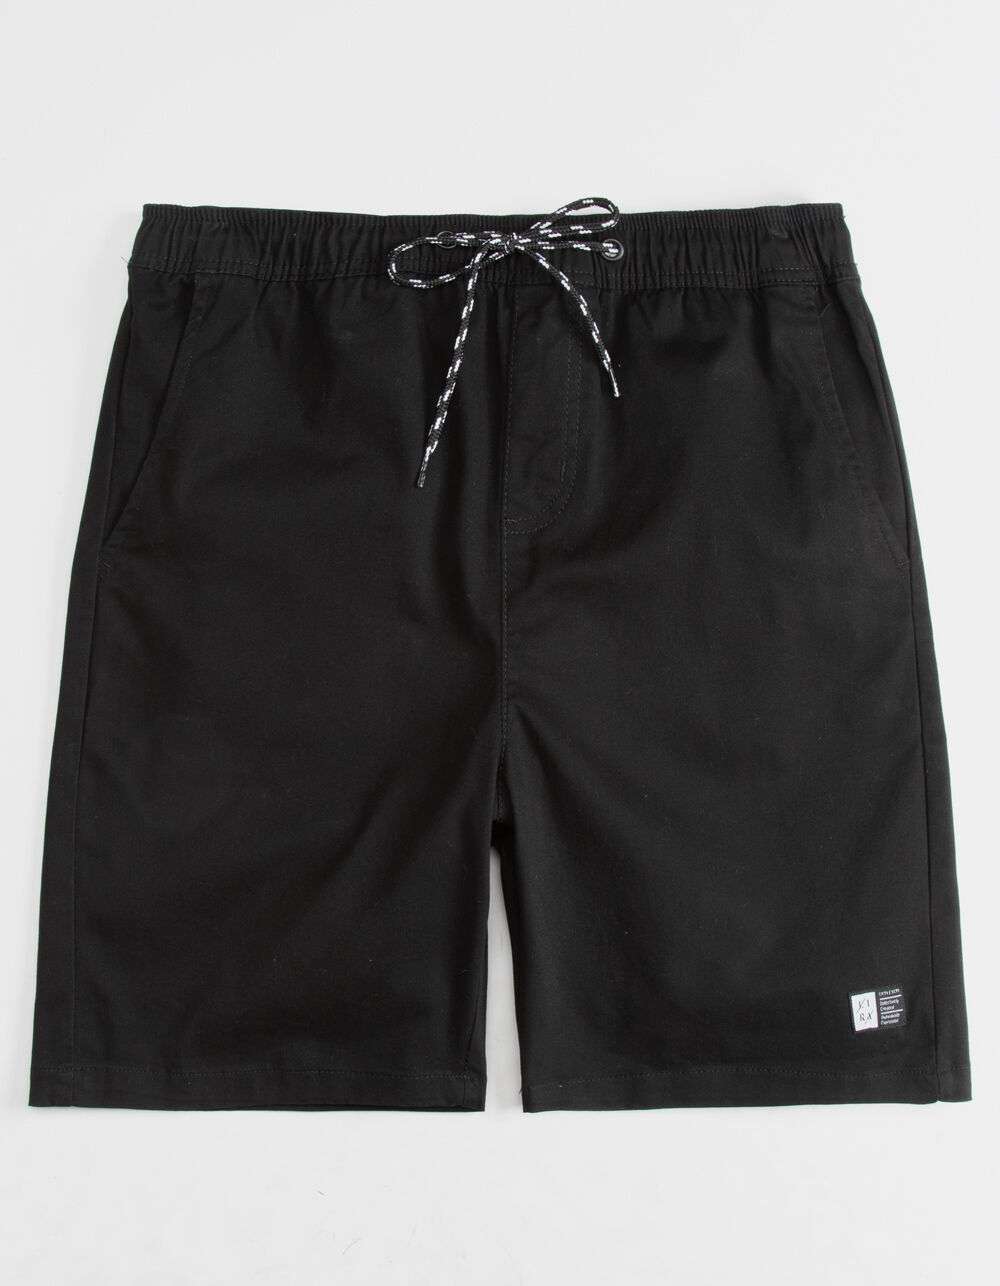 LIRA Forever Volley 2.0 Mens Volley Shorts